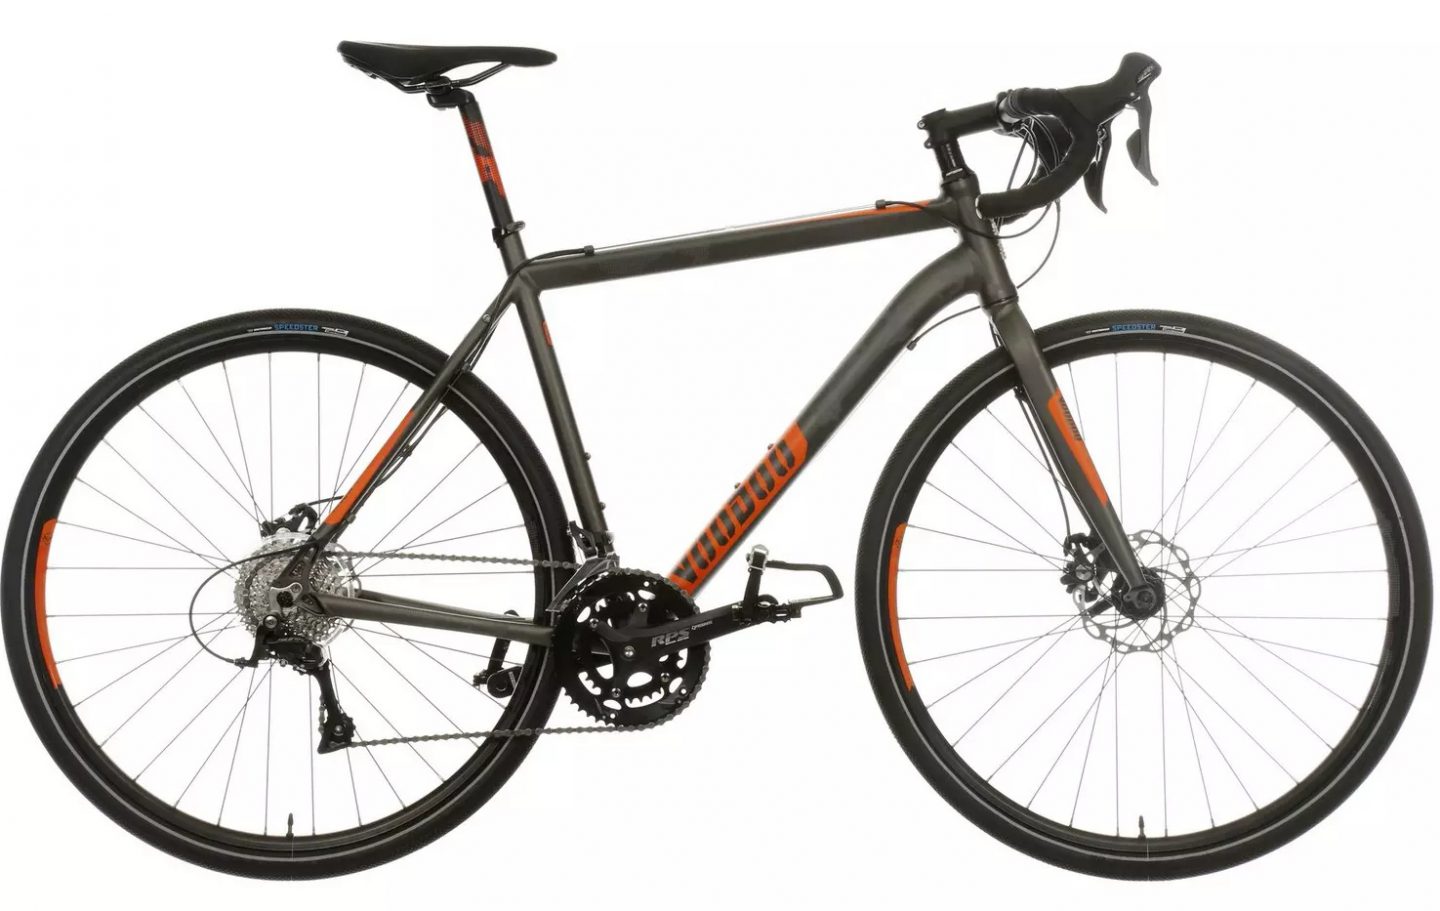 The best budget road bikes - Halfords